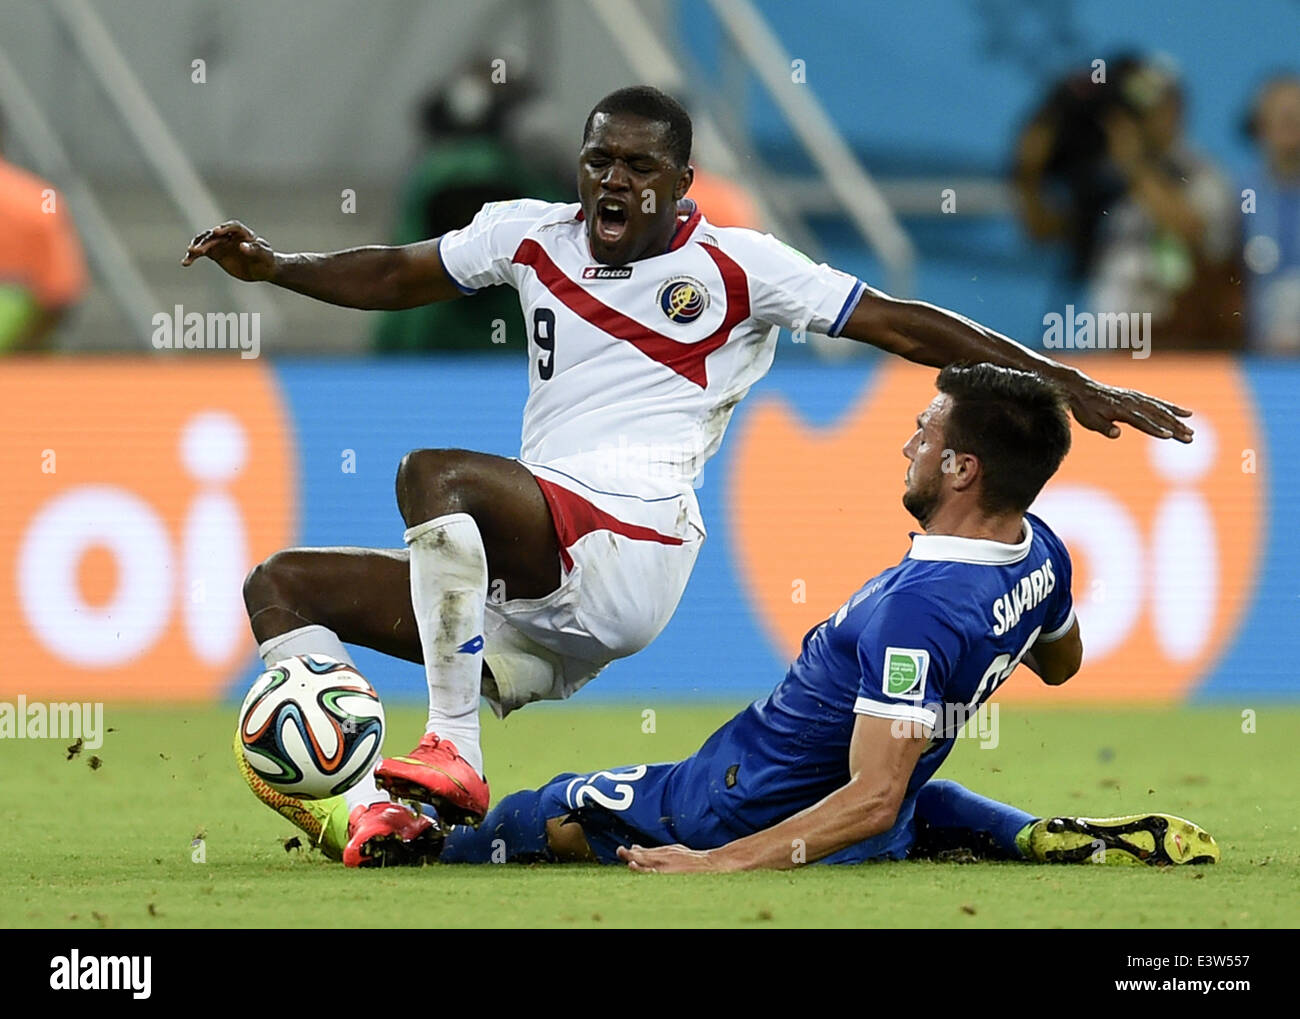 (140629) -- RECIFE, June 29, 2014 (Xinhua) -- Costa Rica's Joel Campbell (top) vies with Greece's Andreas Samaris during a Round of 16 match between Costa Rica and Greece of 2014 FIFA World Cup at the Arena Pernambuco Stadium in Recife, Brazil, on June 29, 2014.(Xinhua/Yang Lei)(xzj) Stock Photo